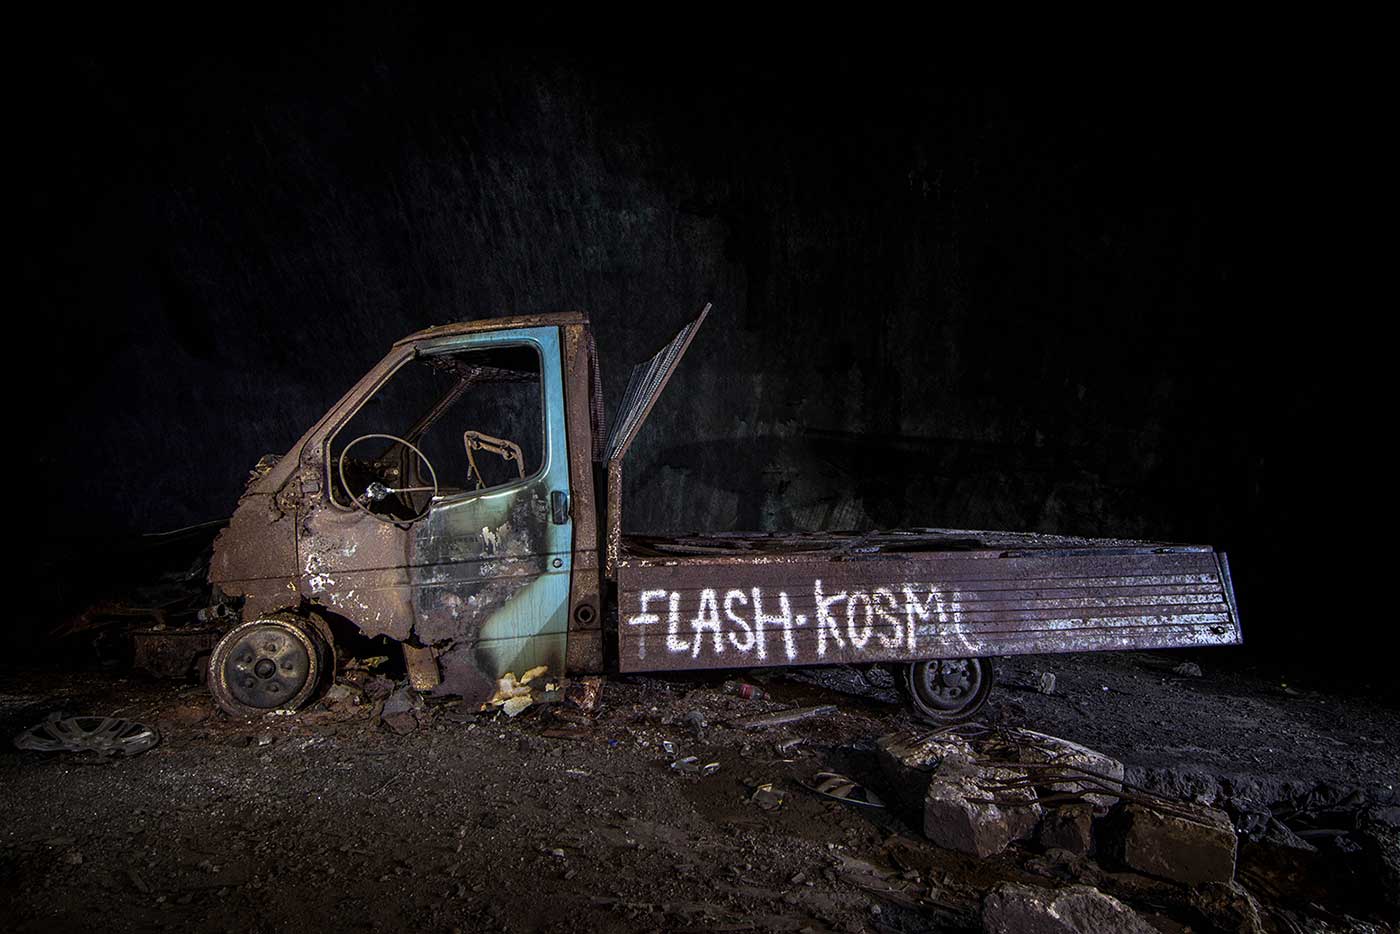 Burnt-out truck inside the former 'KLEK' complex. These 'Flash Kosmo' people seem to have been everywhere. Their tag appears on countless monuments and ruins throughout former Yugoslavia, and even at Buzludzha in Bulgaria.